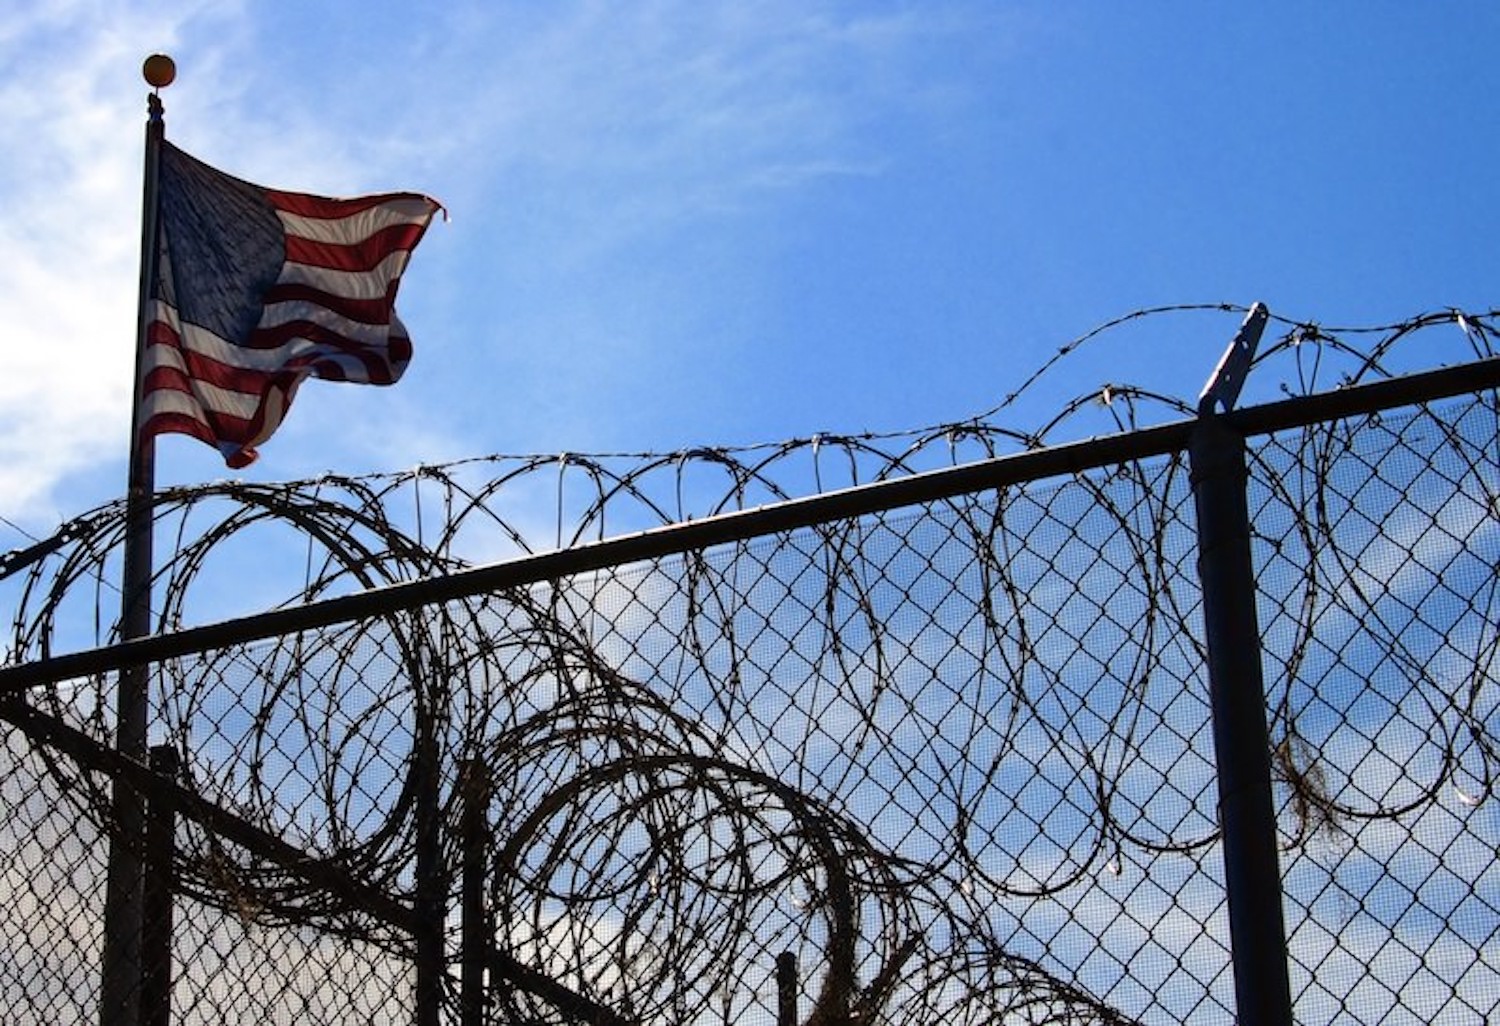 American flag flying above barbed wire